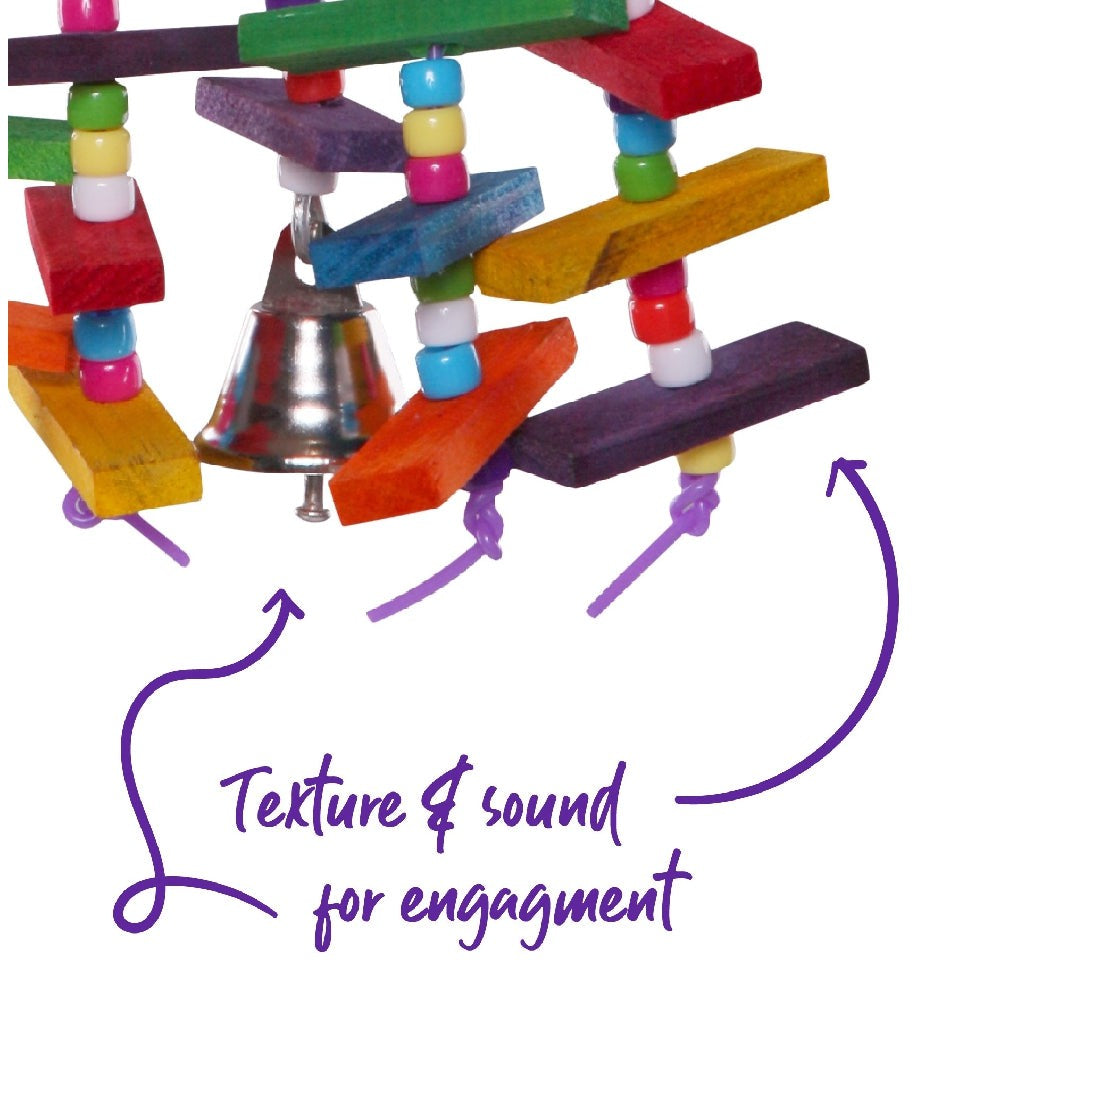 Colorful bird toy with blocks, beads, and bell, text "Texture & sound for engagement."